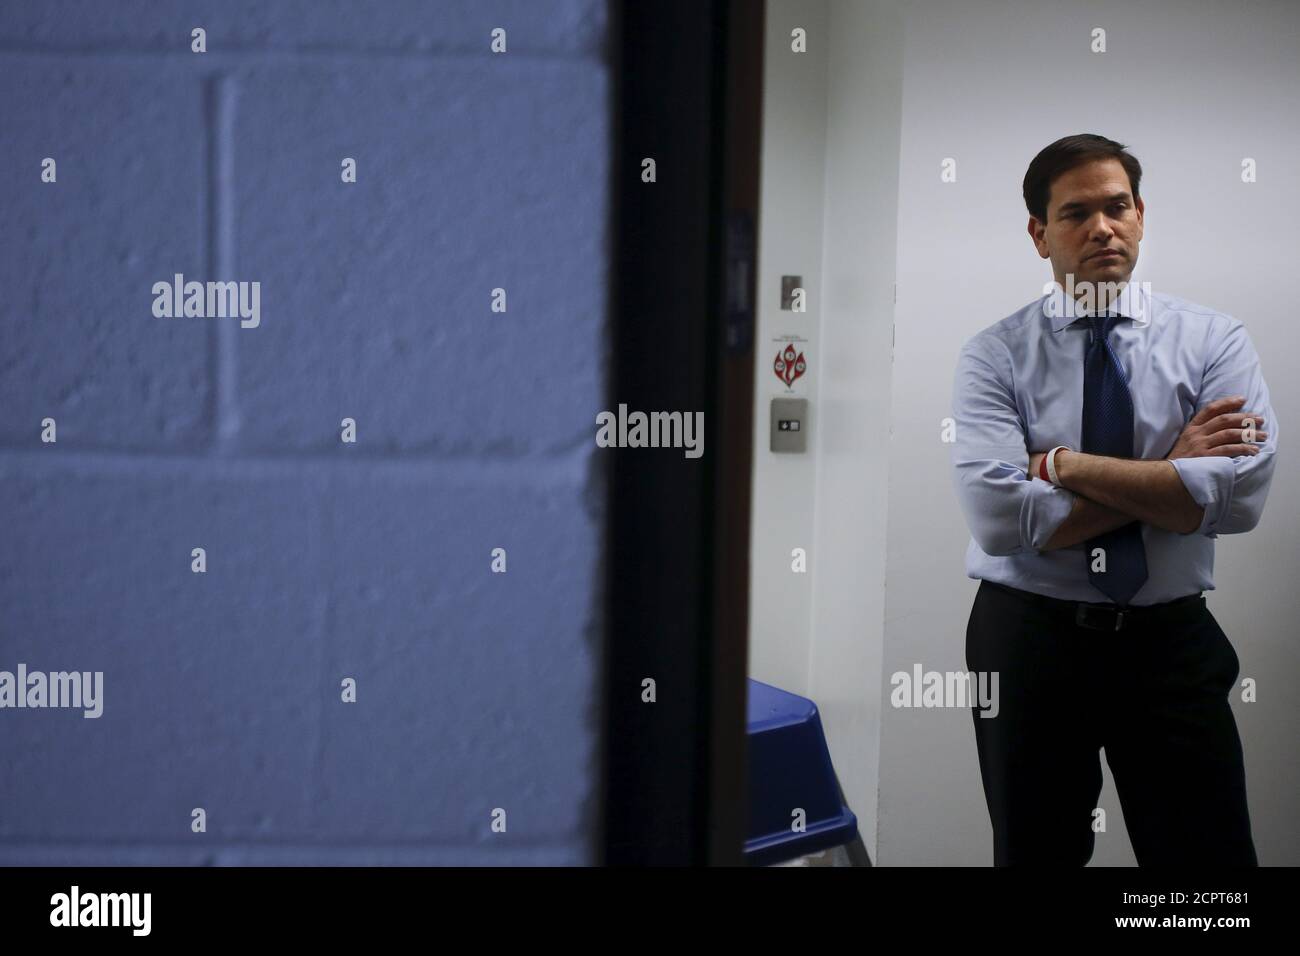 U.S. Senator and Republican presidential candidate Marco Rubio listens to the invocation from a backstage area before a campaign rally at Palm Beach Atlantic University in West Palm Beach, Florida, March 14, 2016.  REUTERS/Carlo Allegri Stock Photo